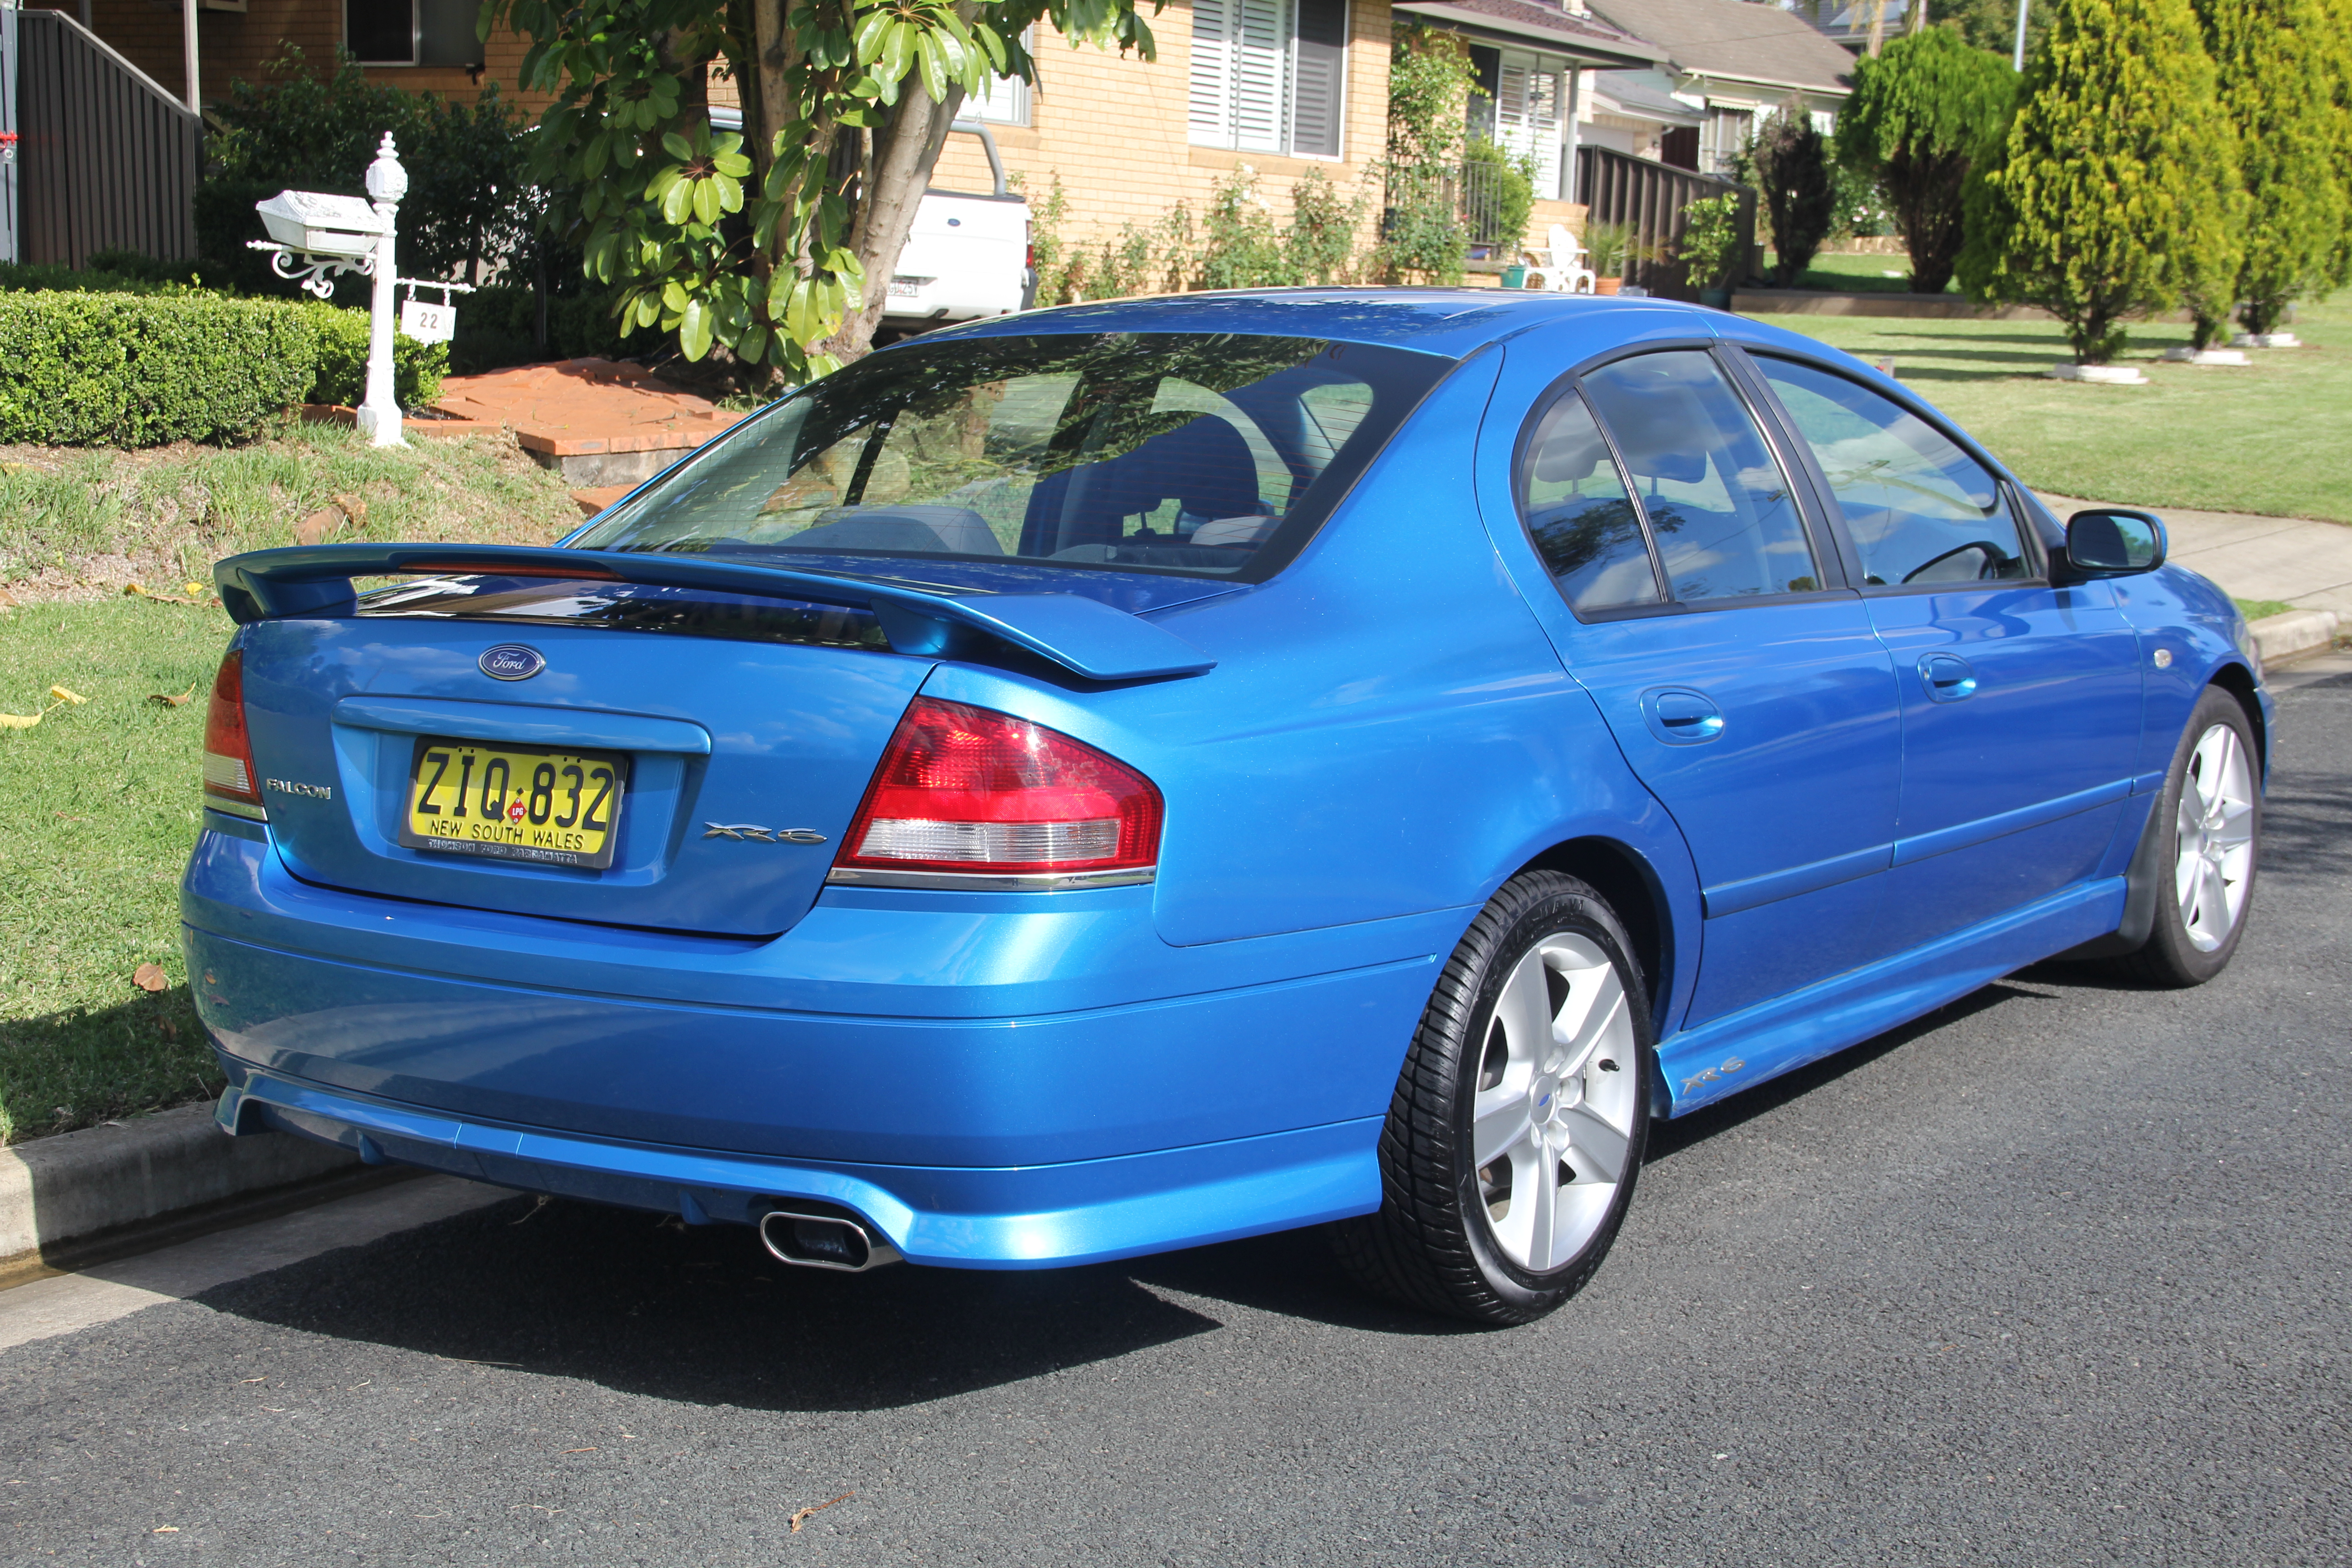 2004 Ford falcon ba mkii xr6 review #9